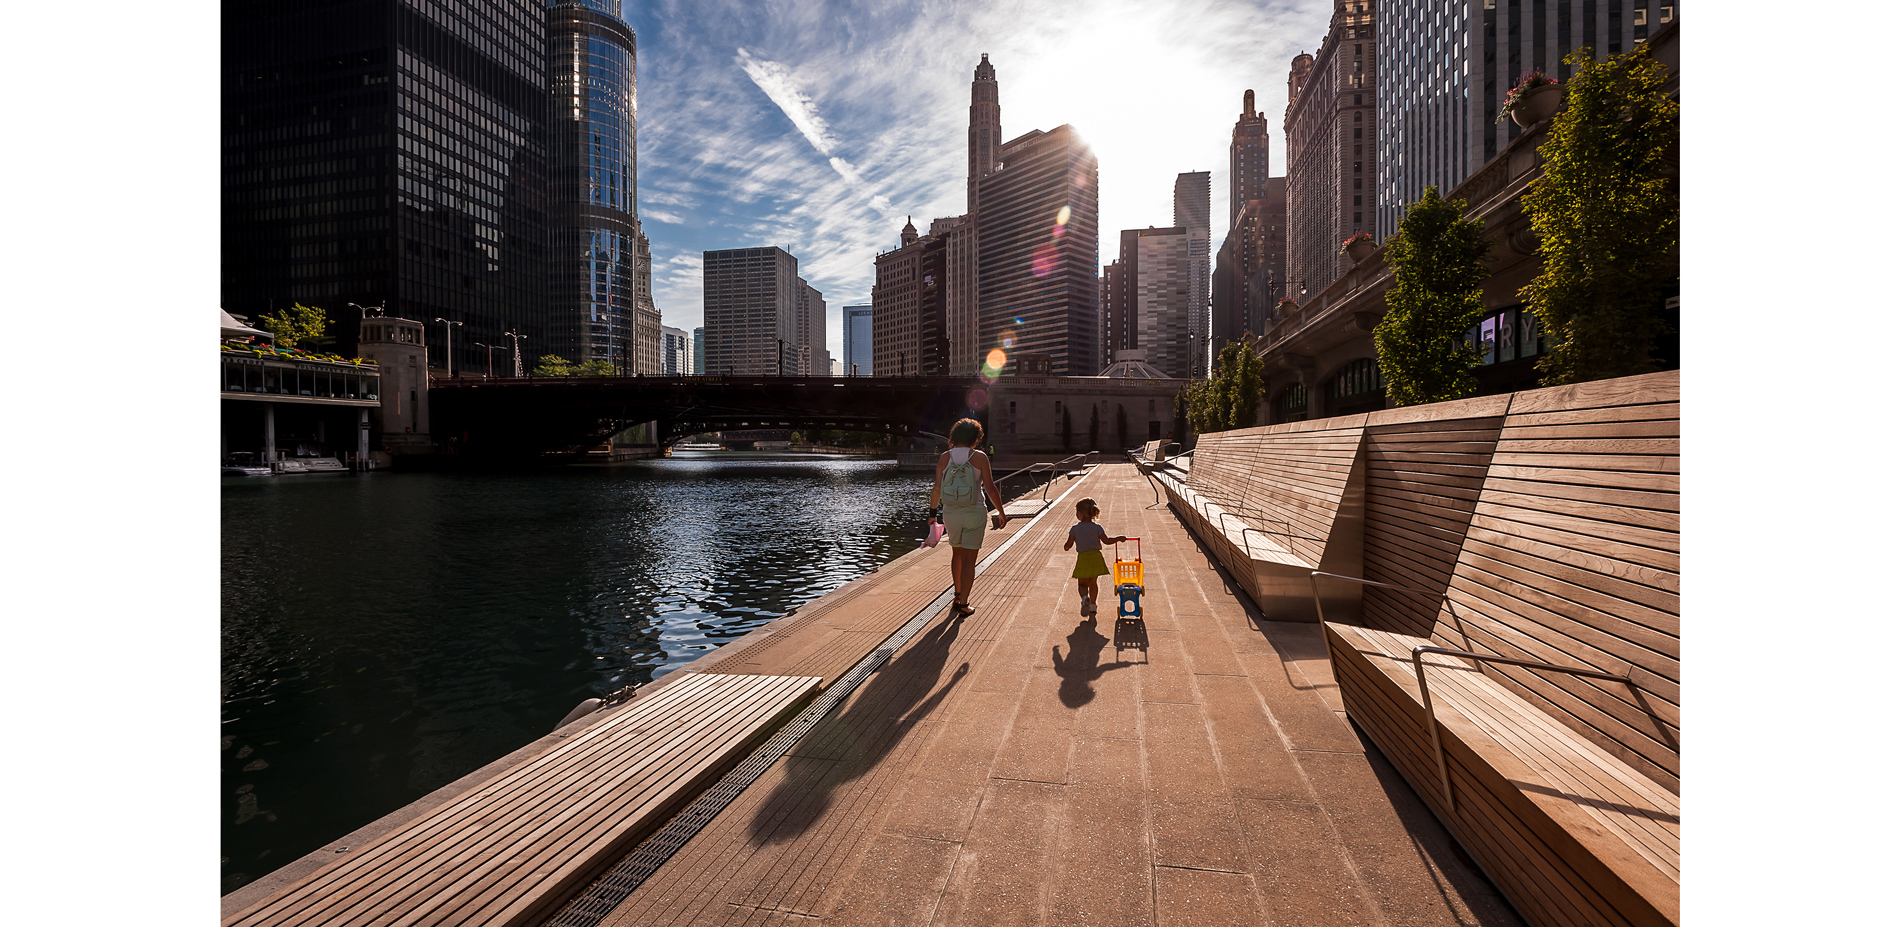 Before the city comes to life, the generous Riverwalk is a peaceful respite from the from the hustle and bustle of downtown actvity.  The Riverwalk se…